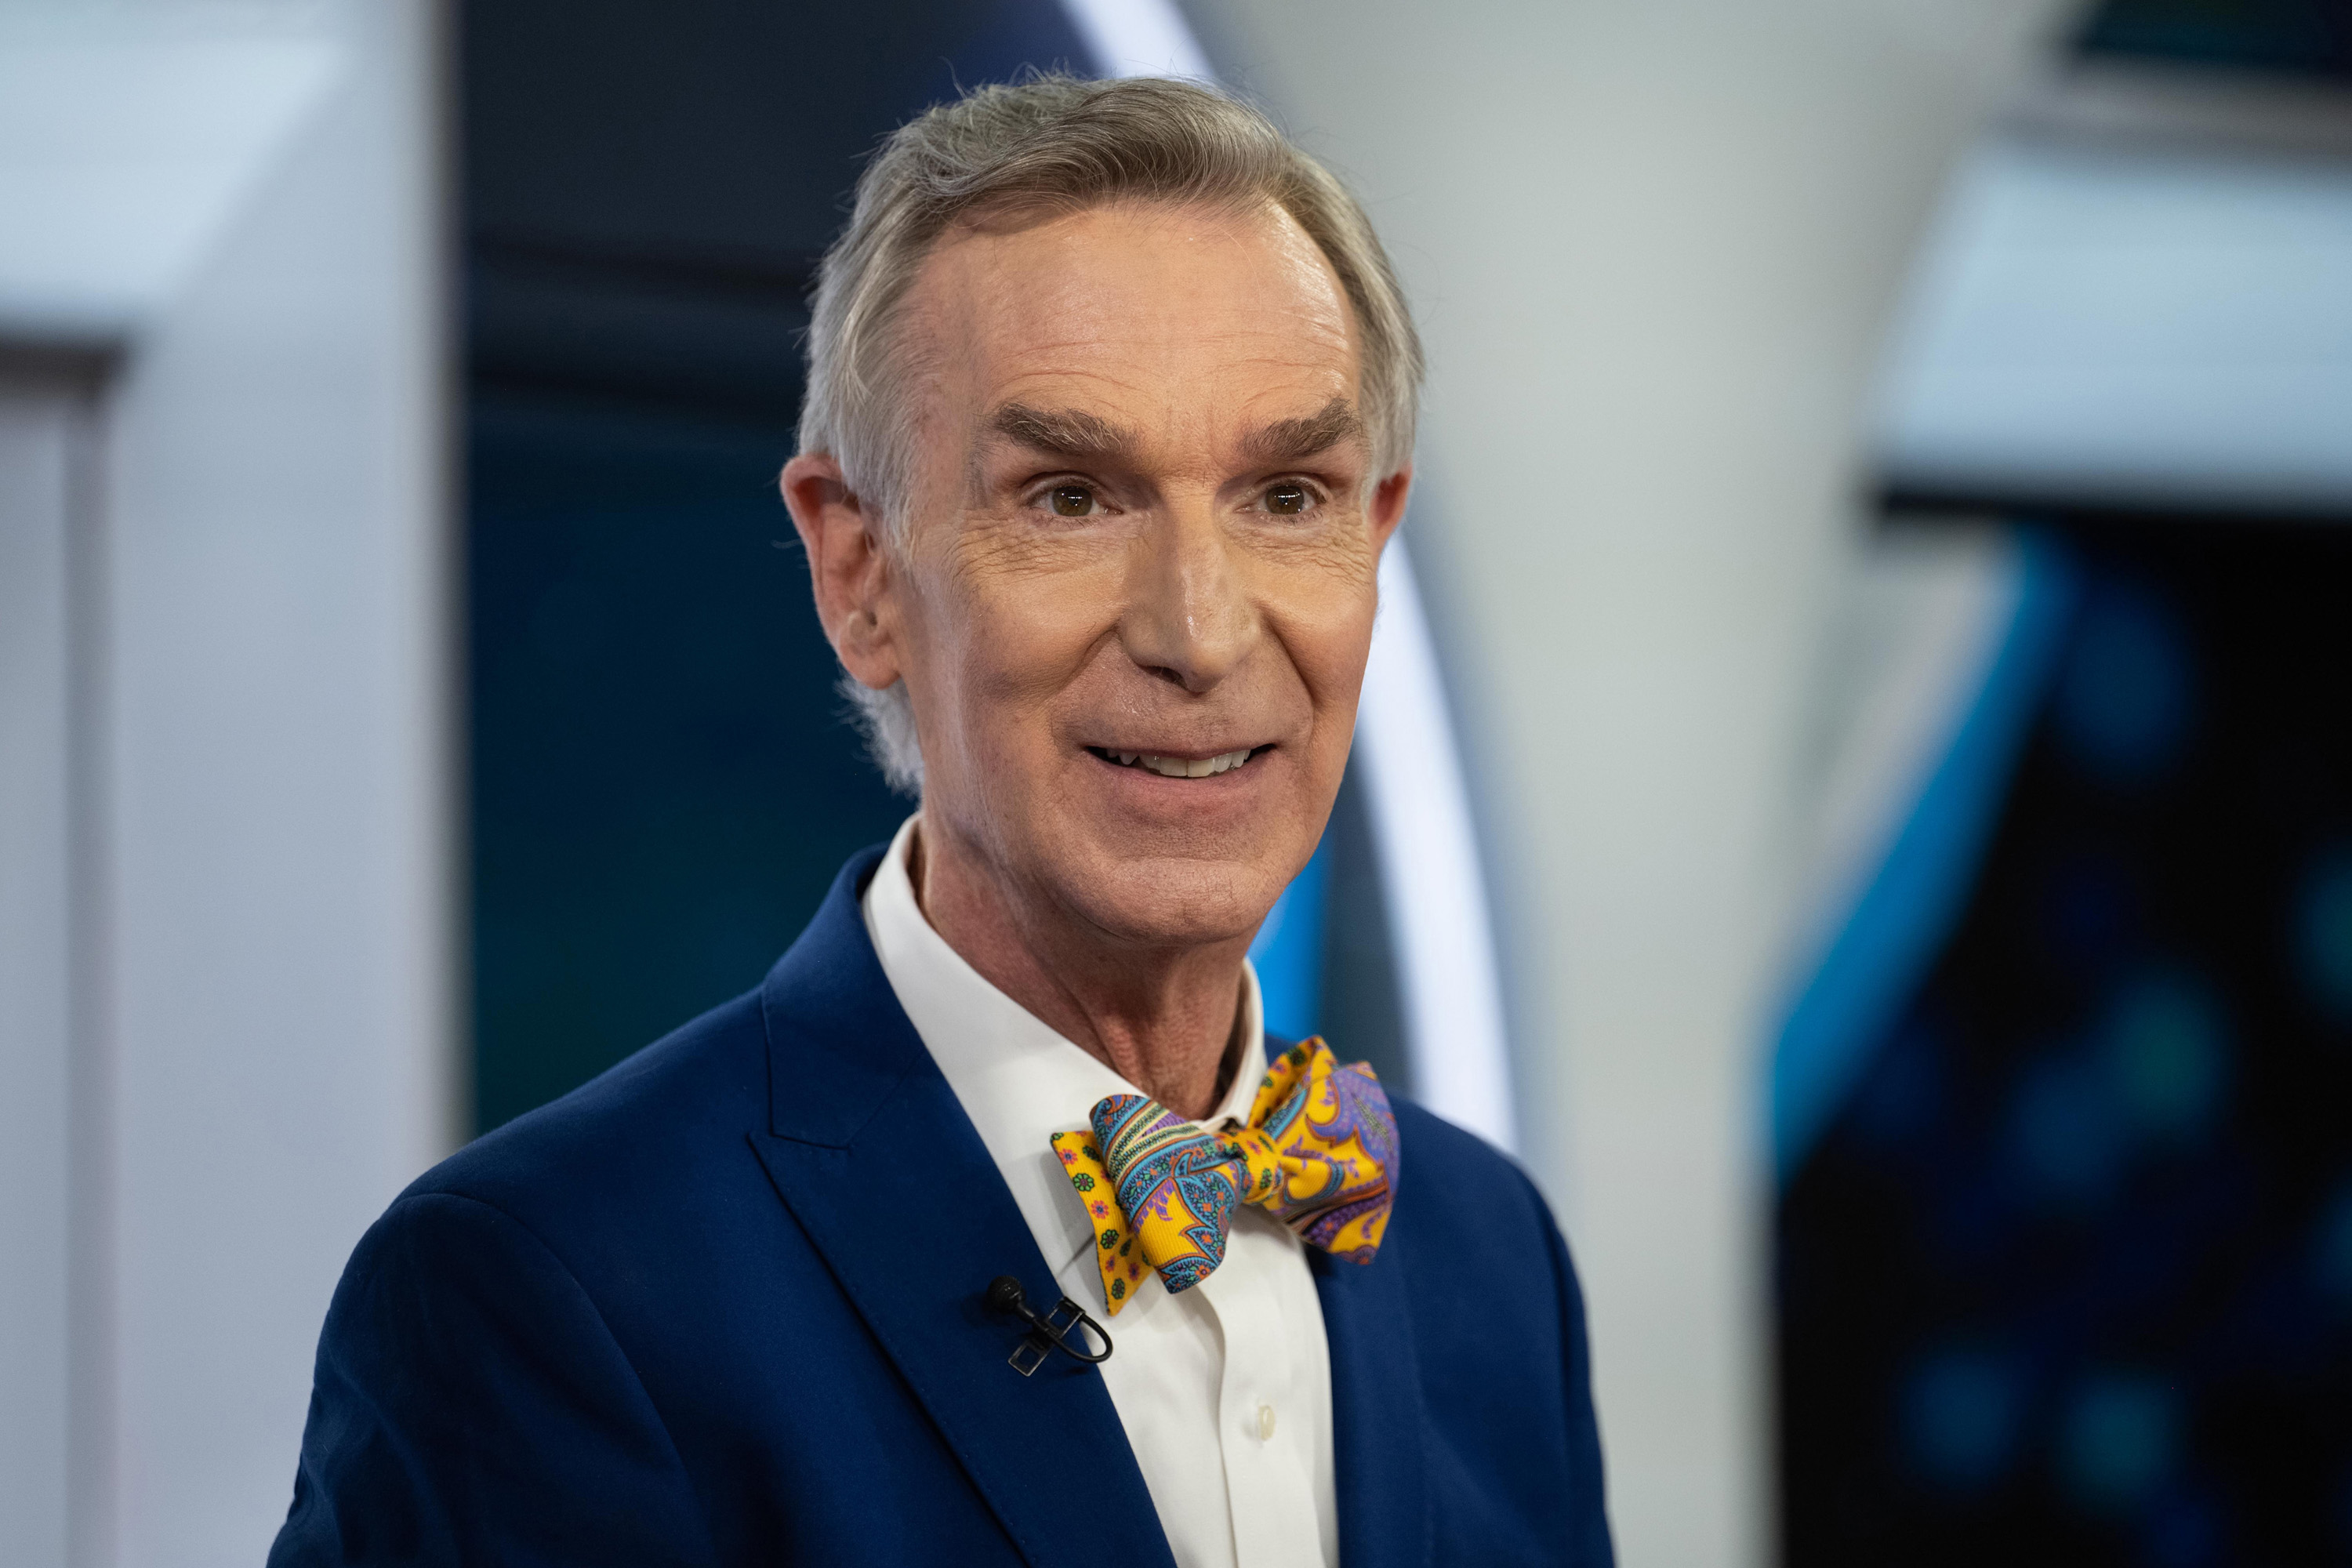 Bill Nye during his appearance on "Today" on Tuesday, May 9, 2023 | Source: Getty Images